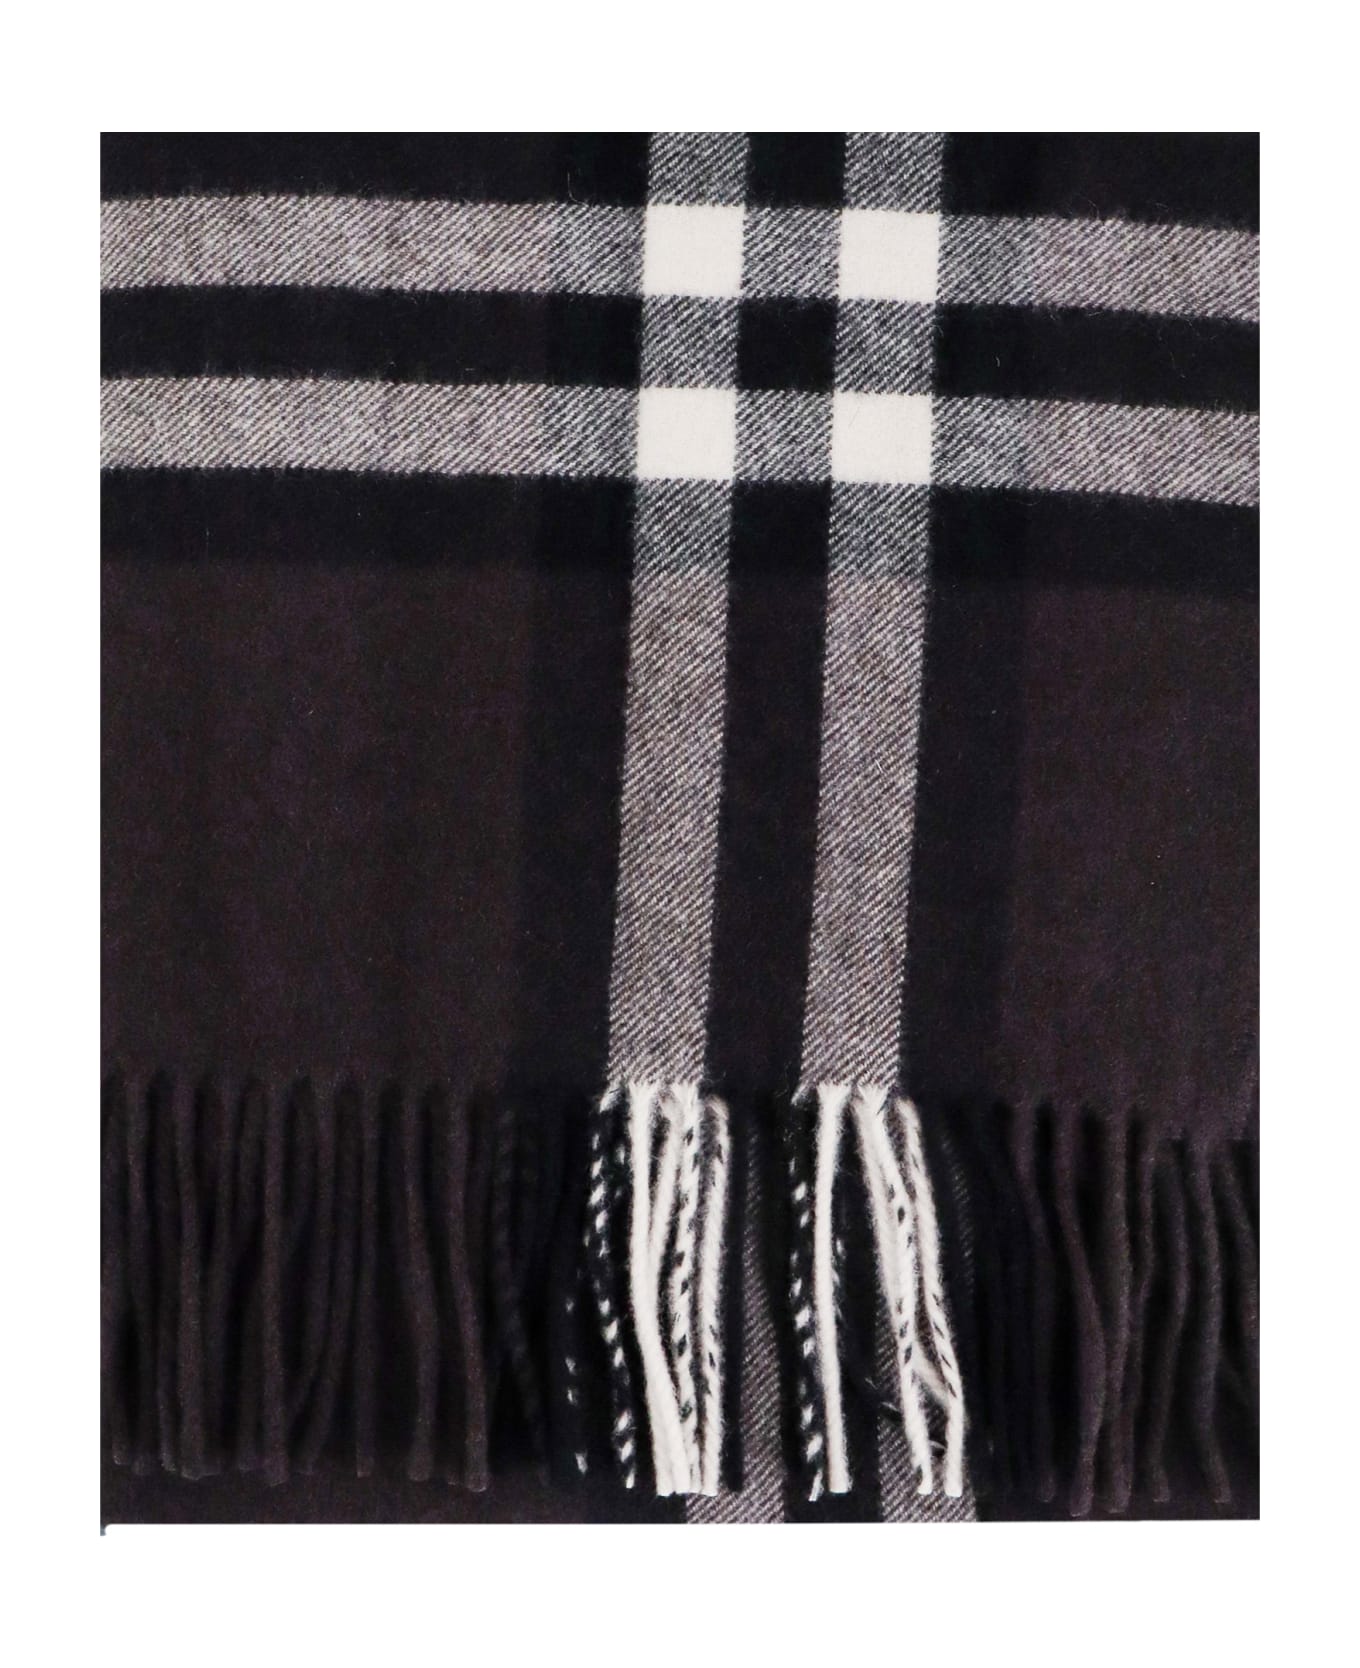 Burberry Scarf - Brown スカーフ＆ストール